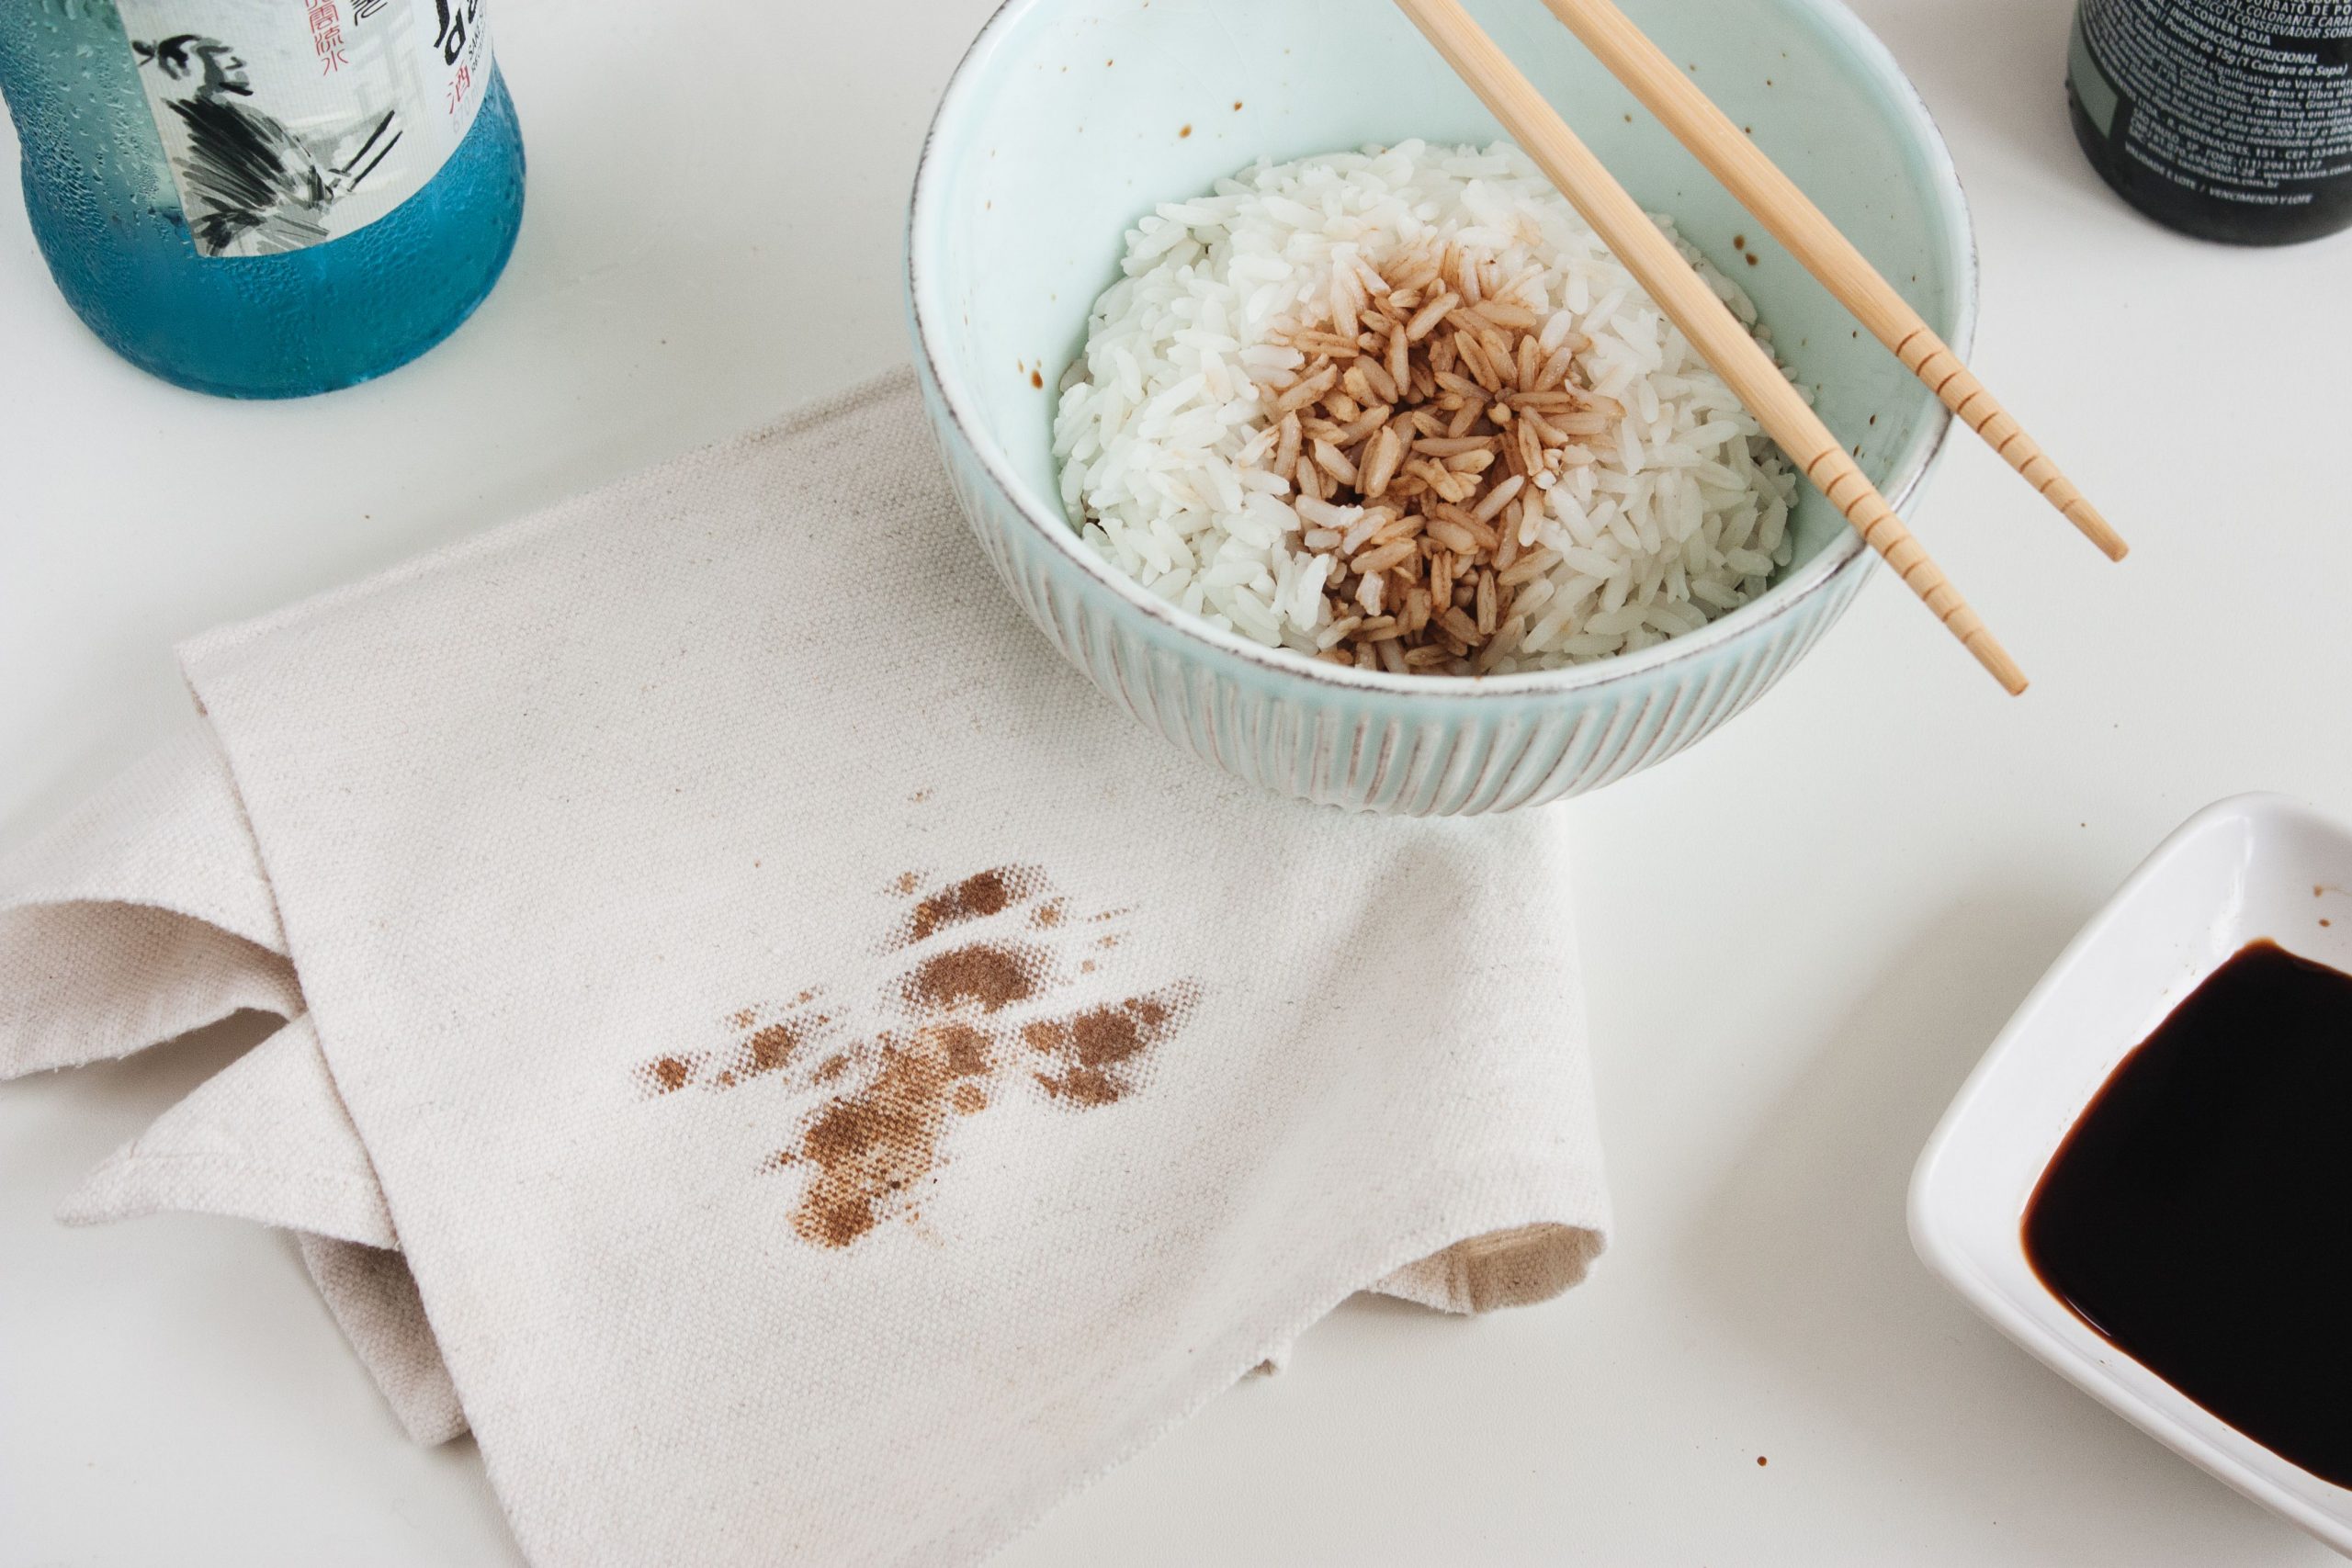 How to Remove Soy Sauce Stains From Clothes, Upholstery and Carpets